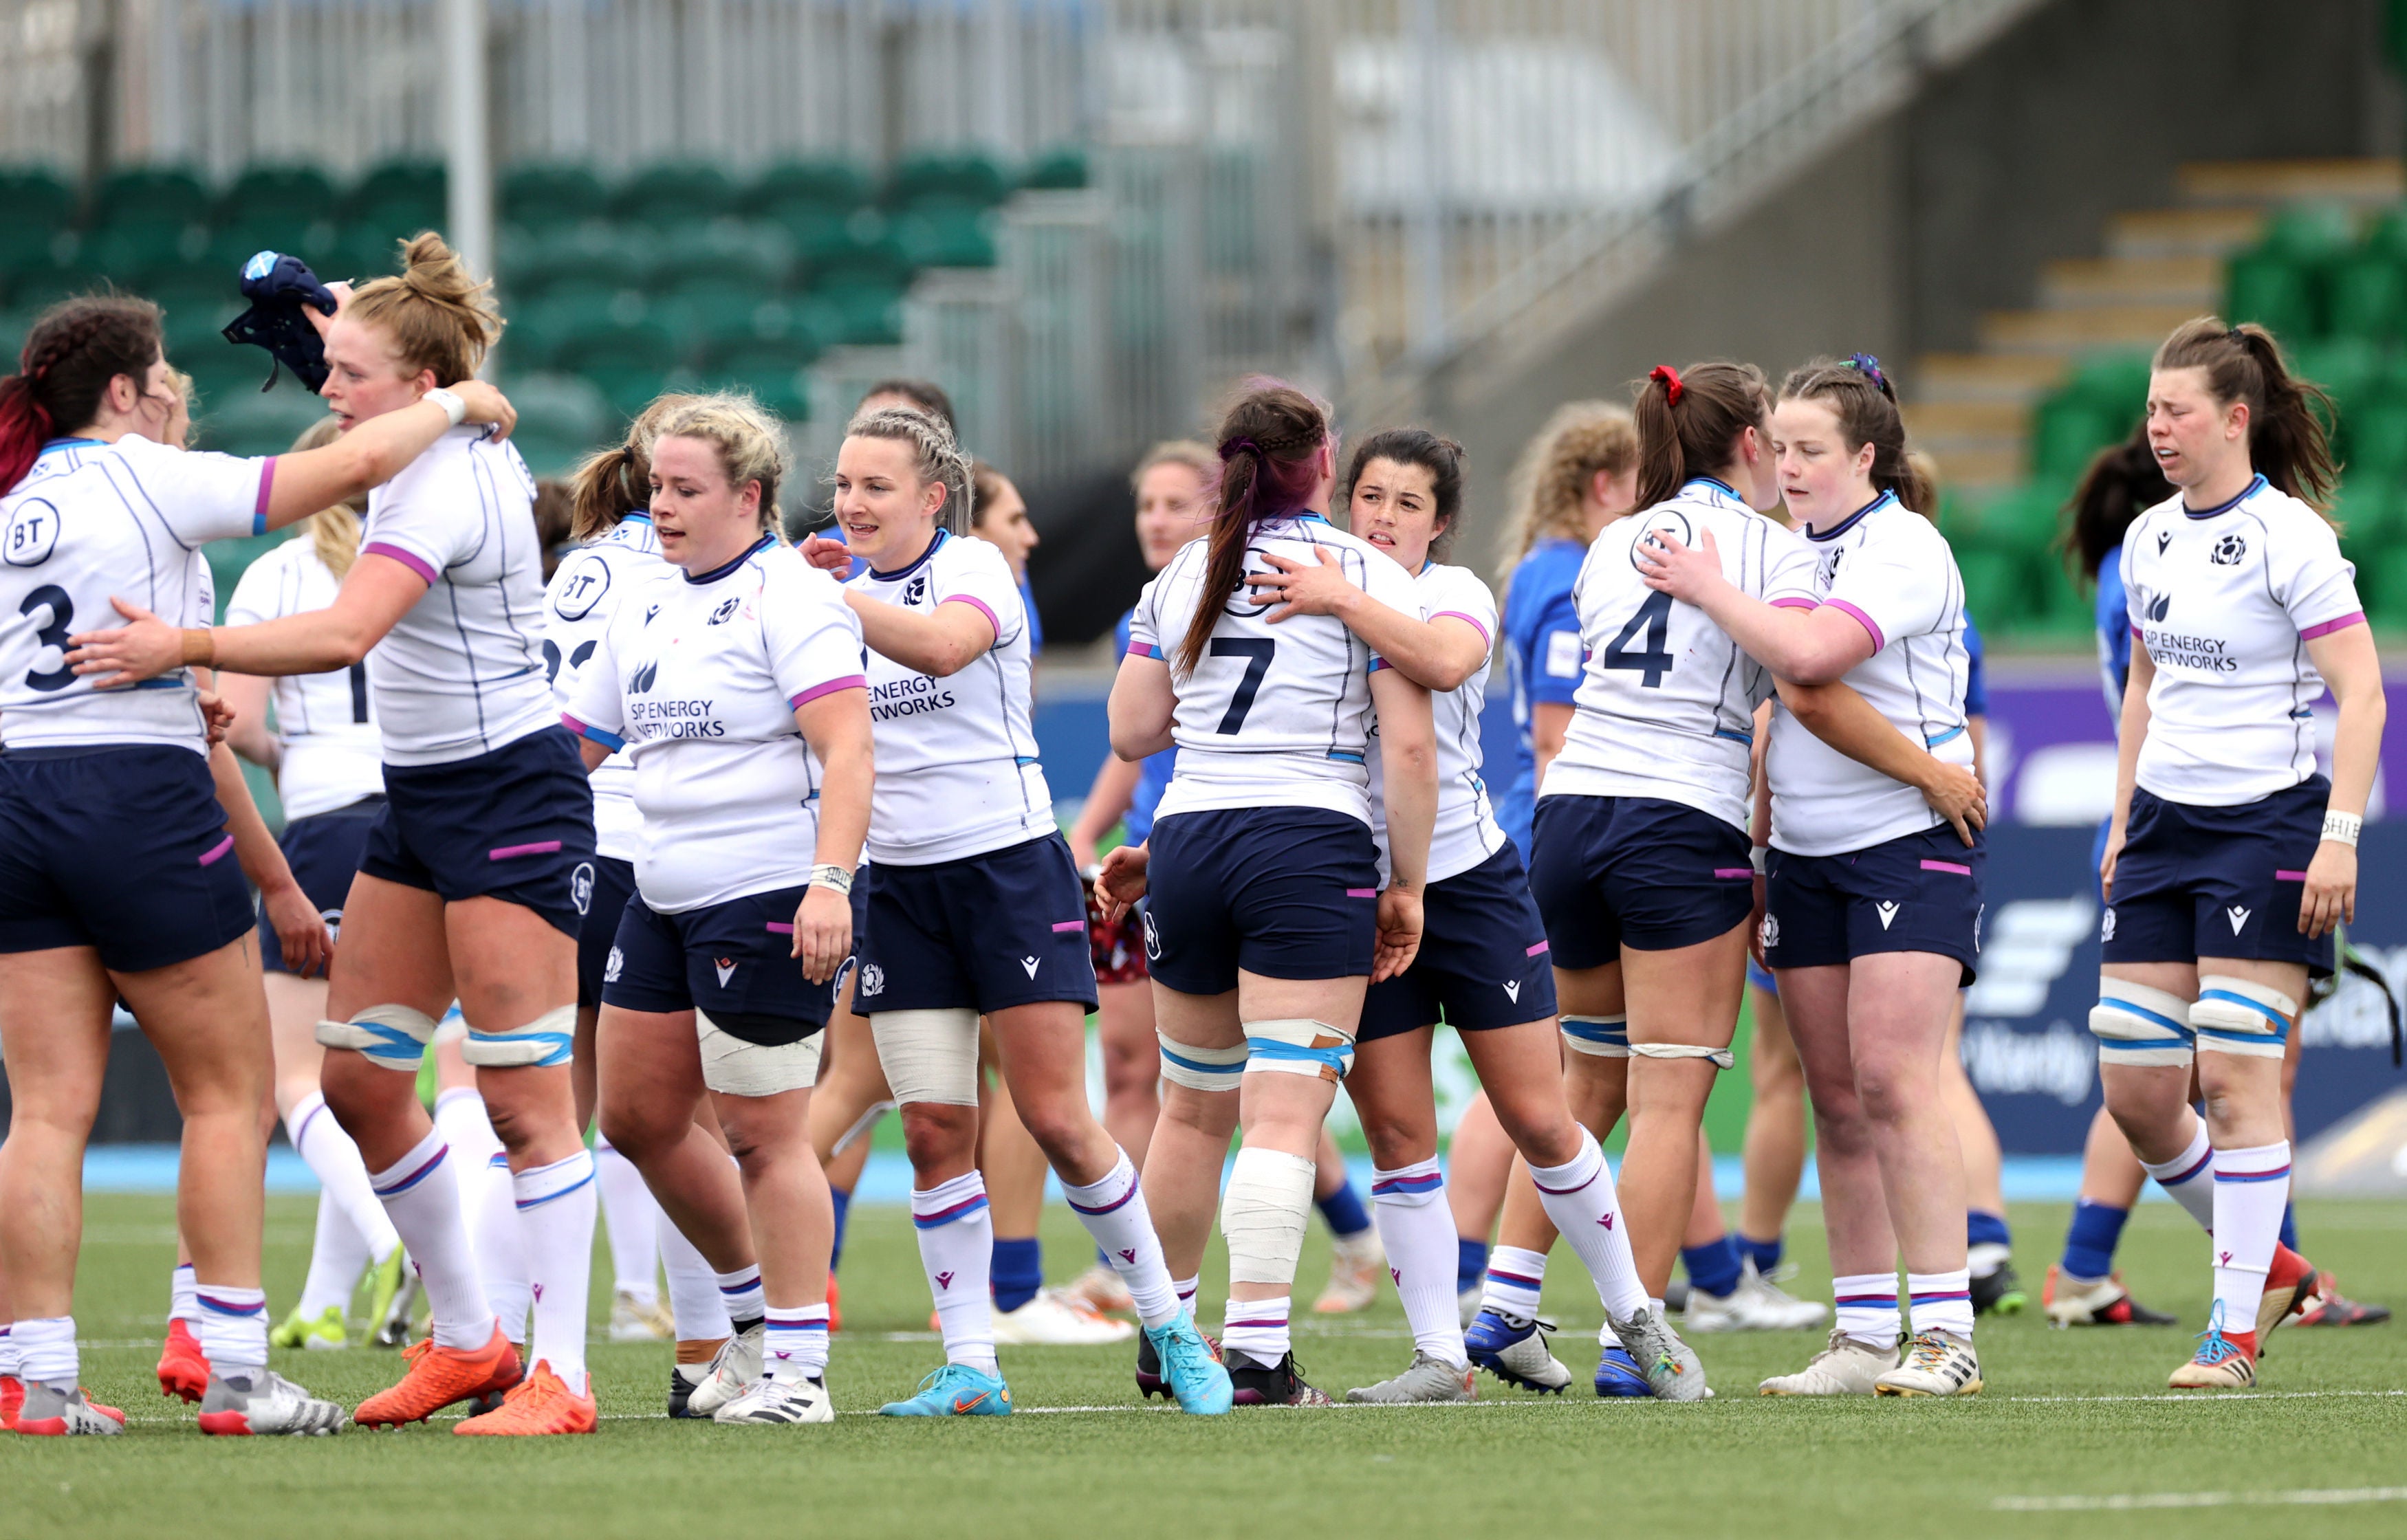 Scotland lost their fourth game on the spin in this year’s Women’s Six Nations